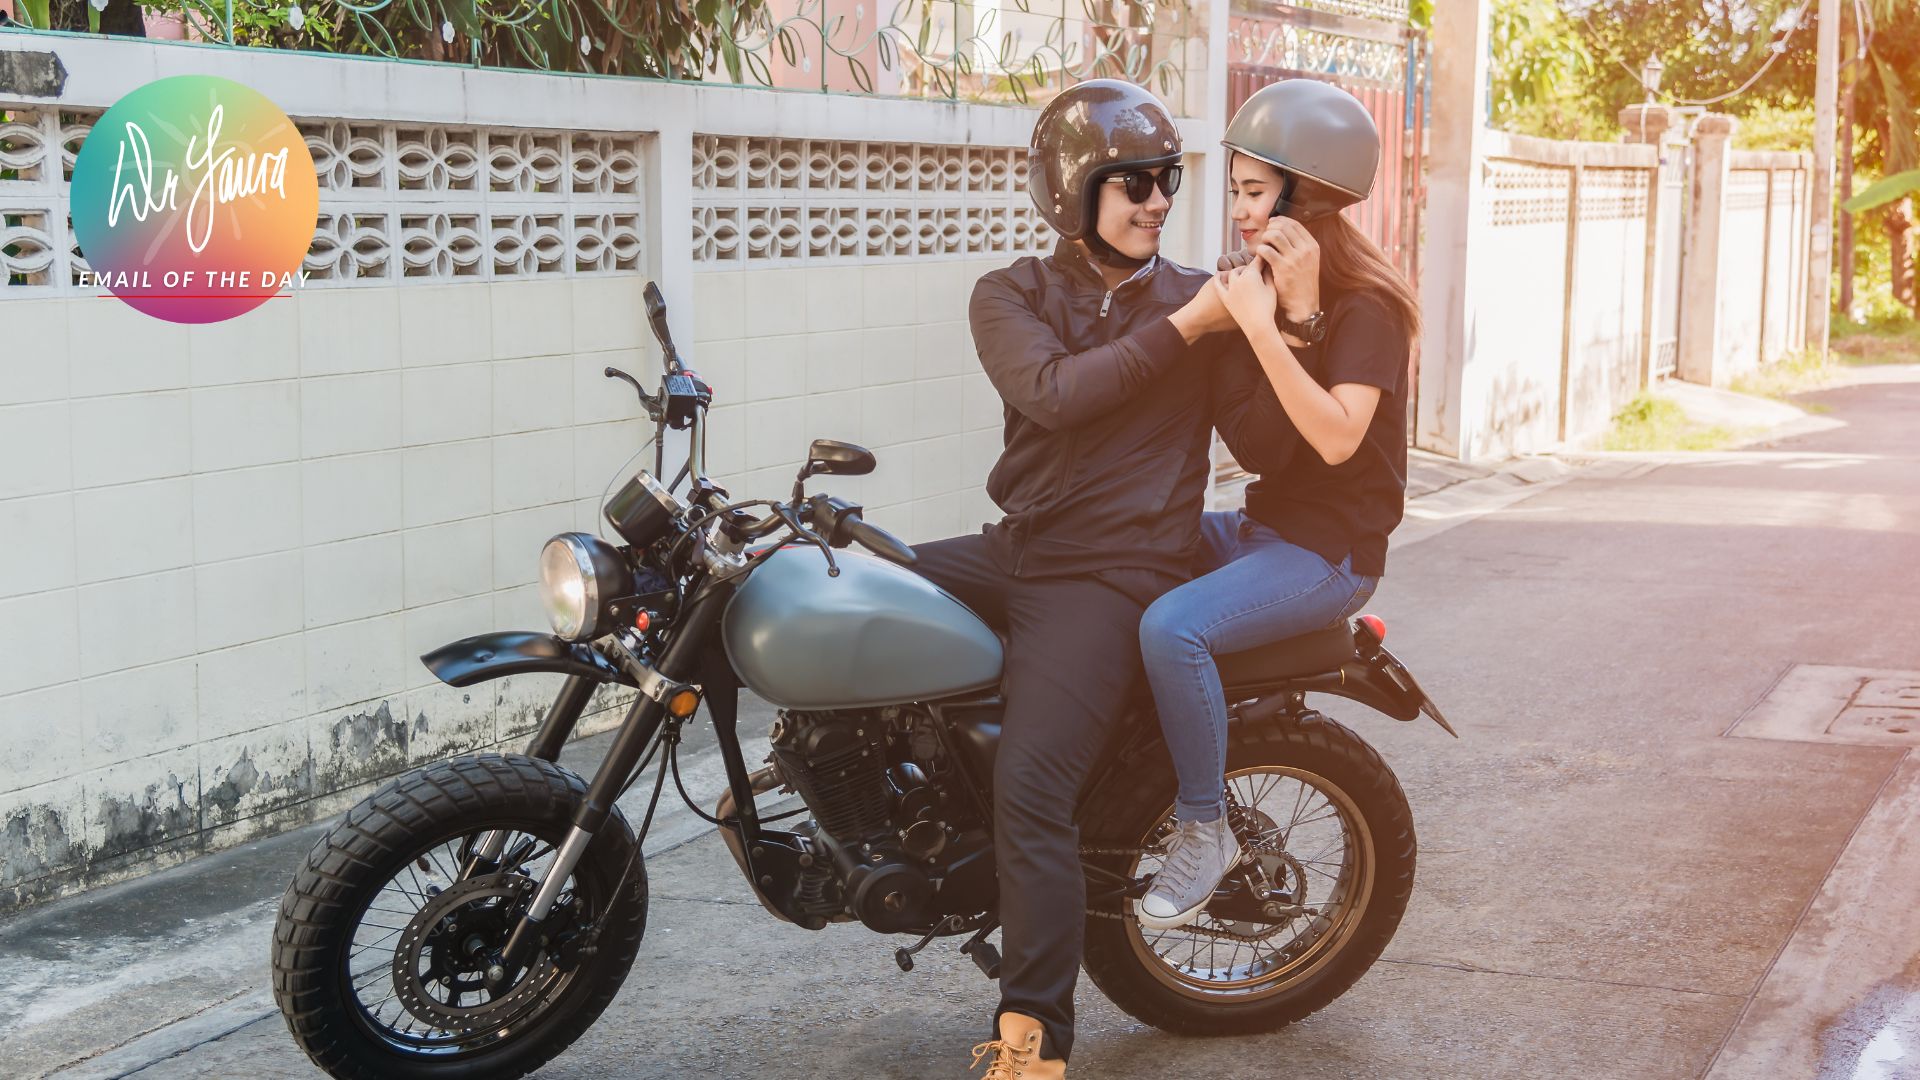 Man in black jacket and woman in black shirt sit next to each other on a parked motorcycle, holding hands